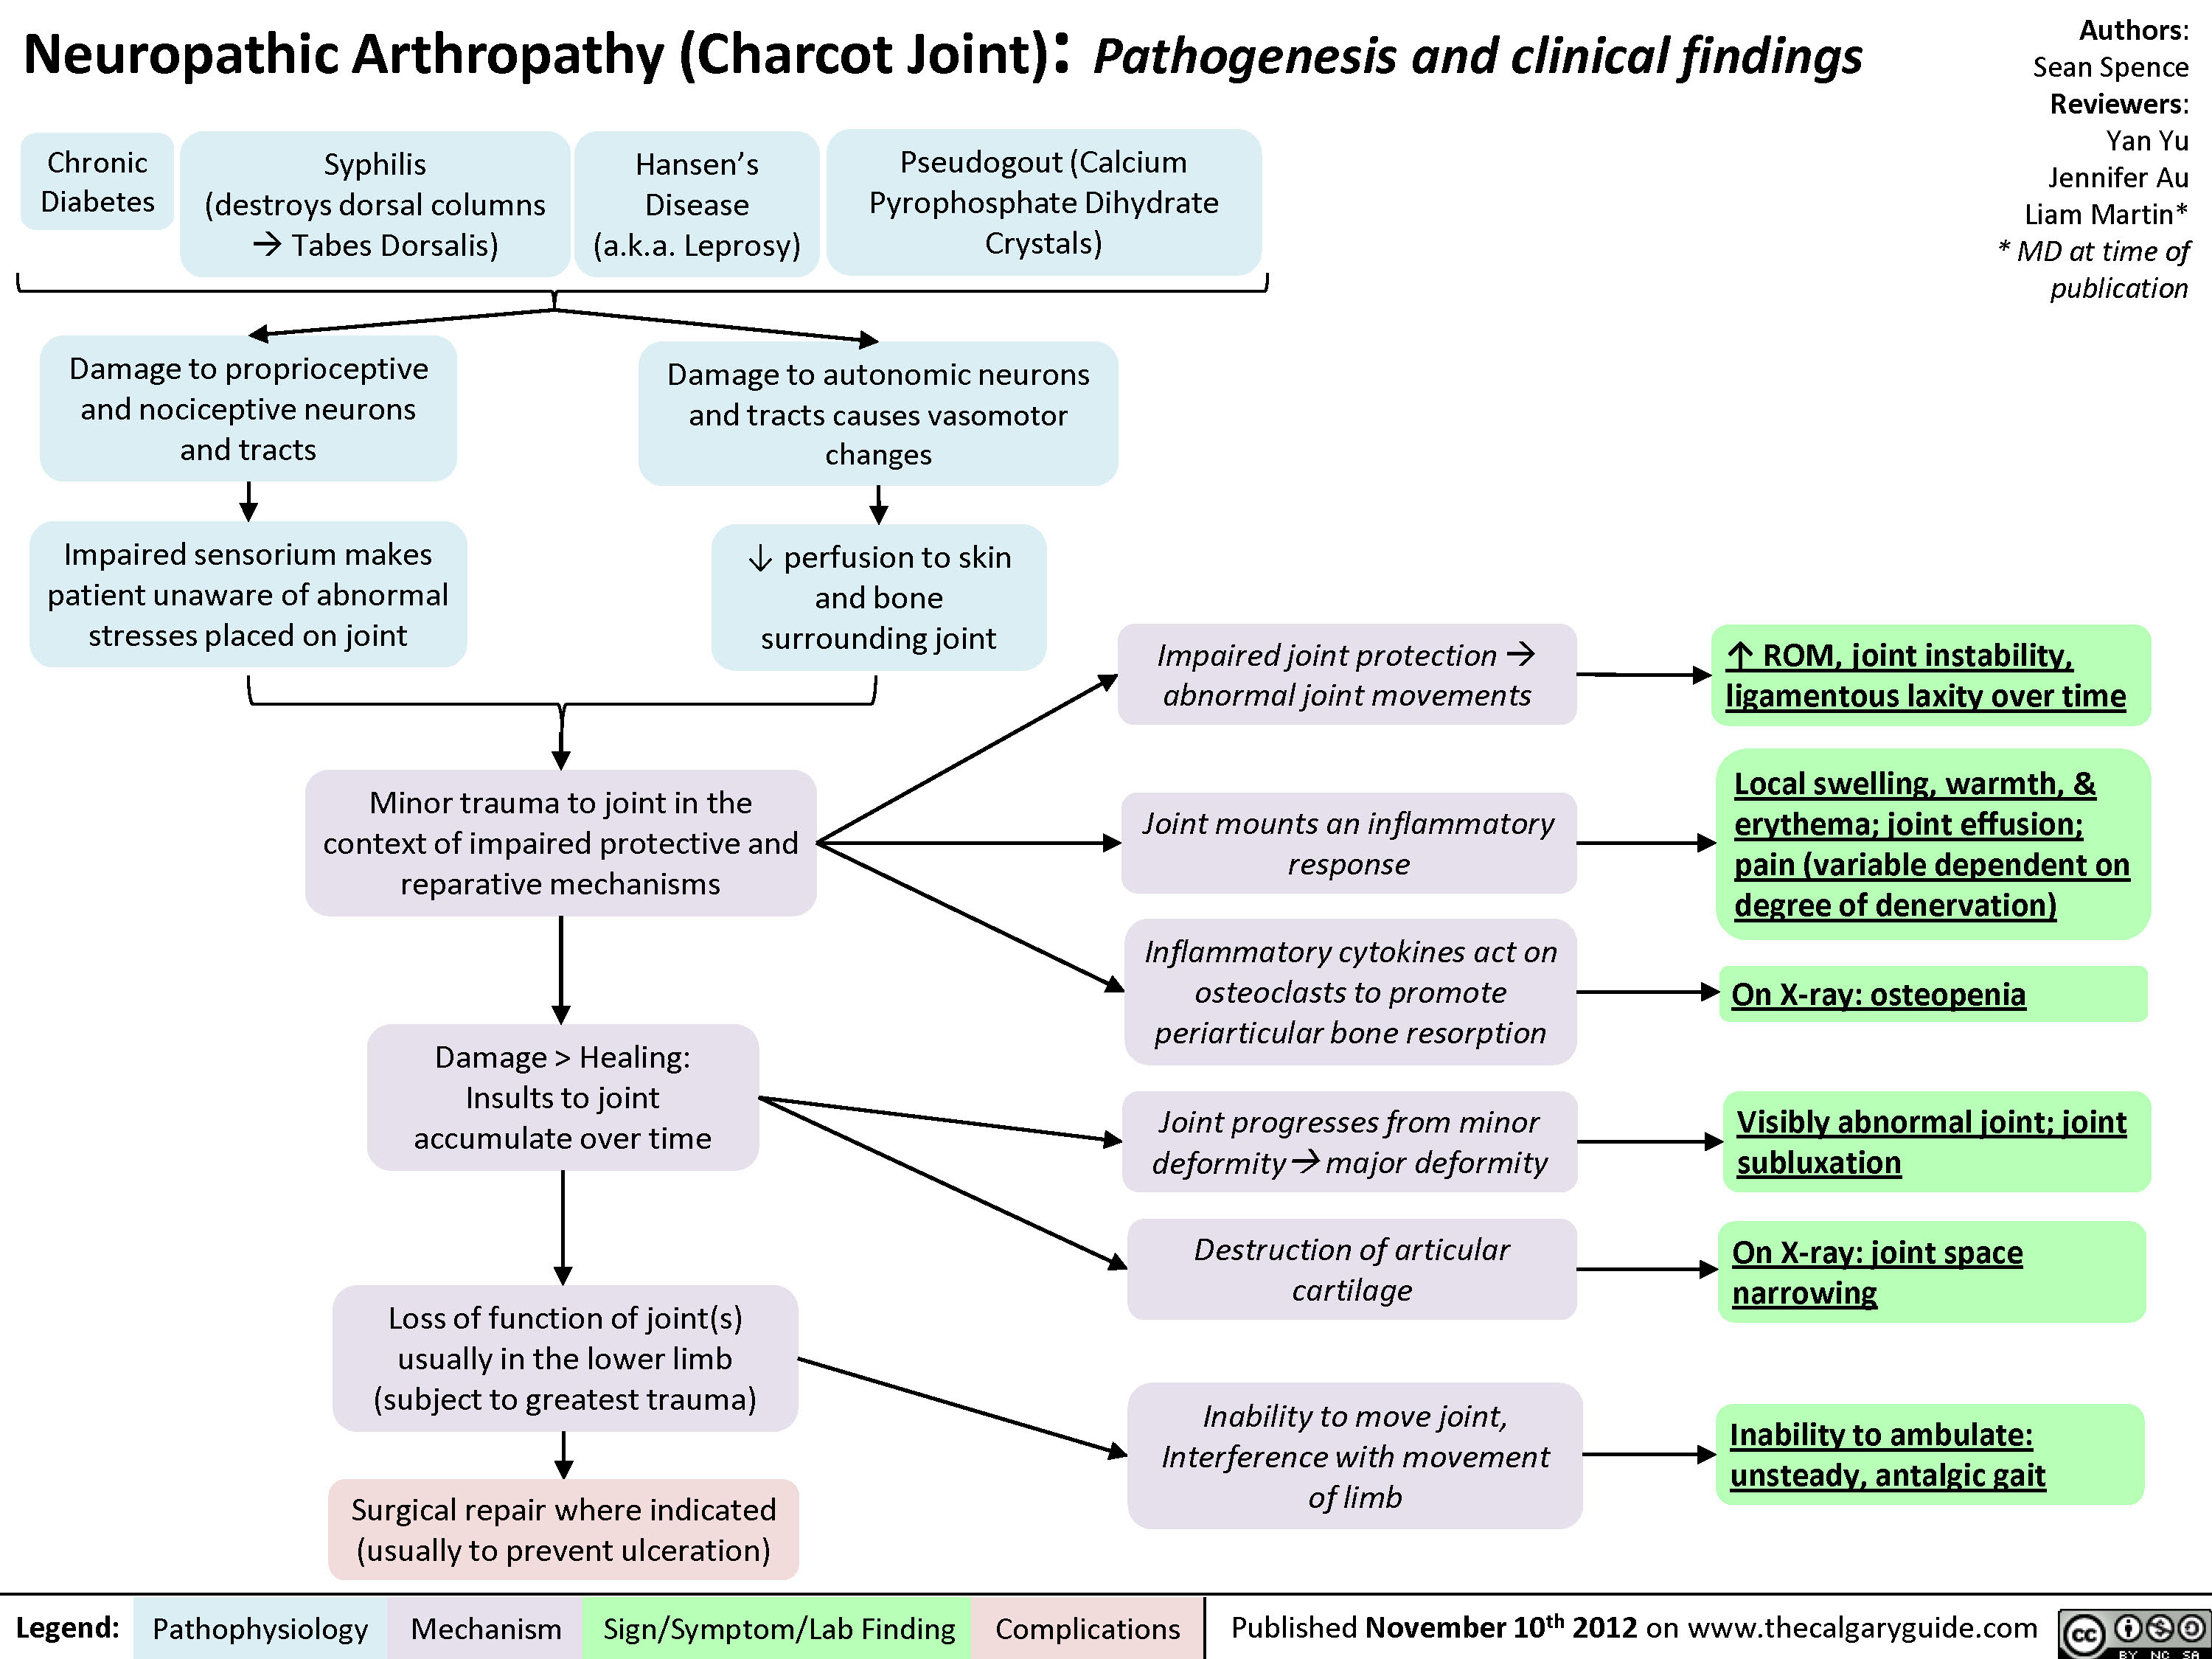 Charcot Joint: Pathogenesis and Clinical findings